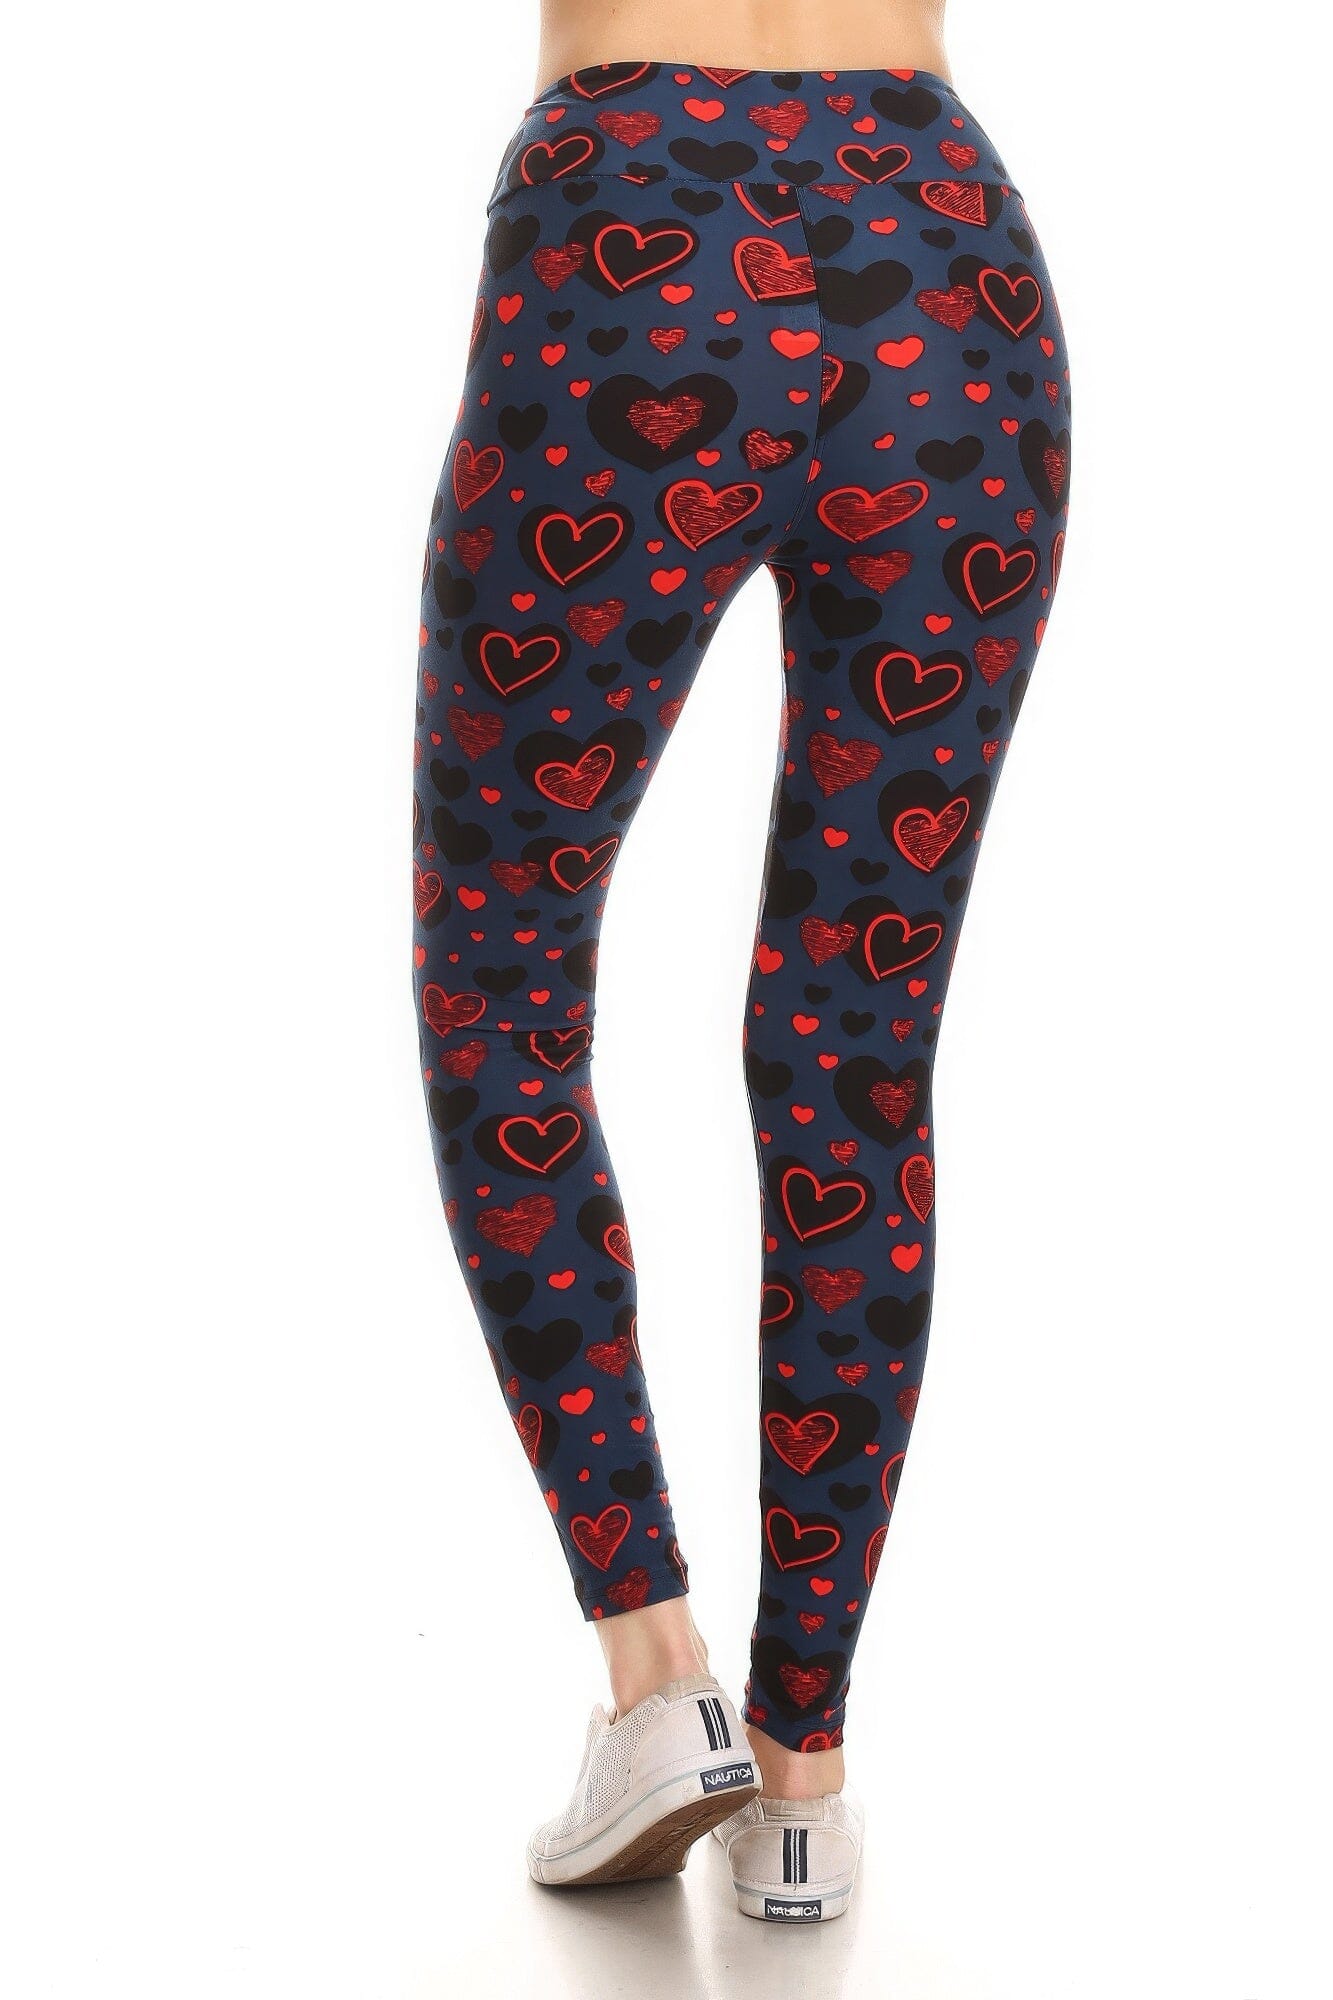 Yoga Style Banded Lined Heart Print In A Slim Fitting Style With A Banded High Waist Full Length Leggings Pants jehouze 